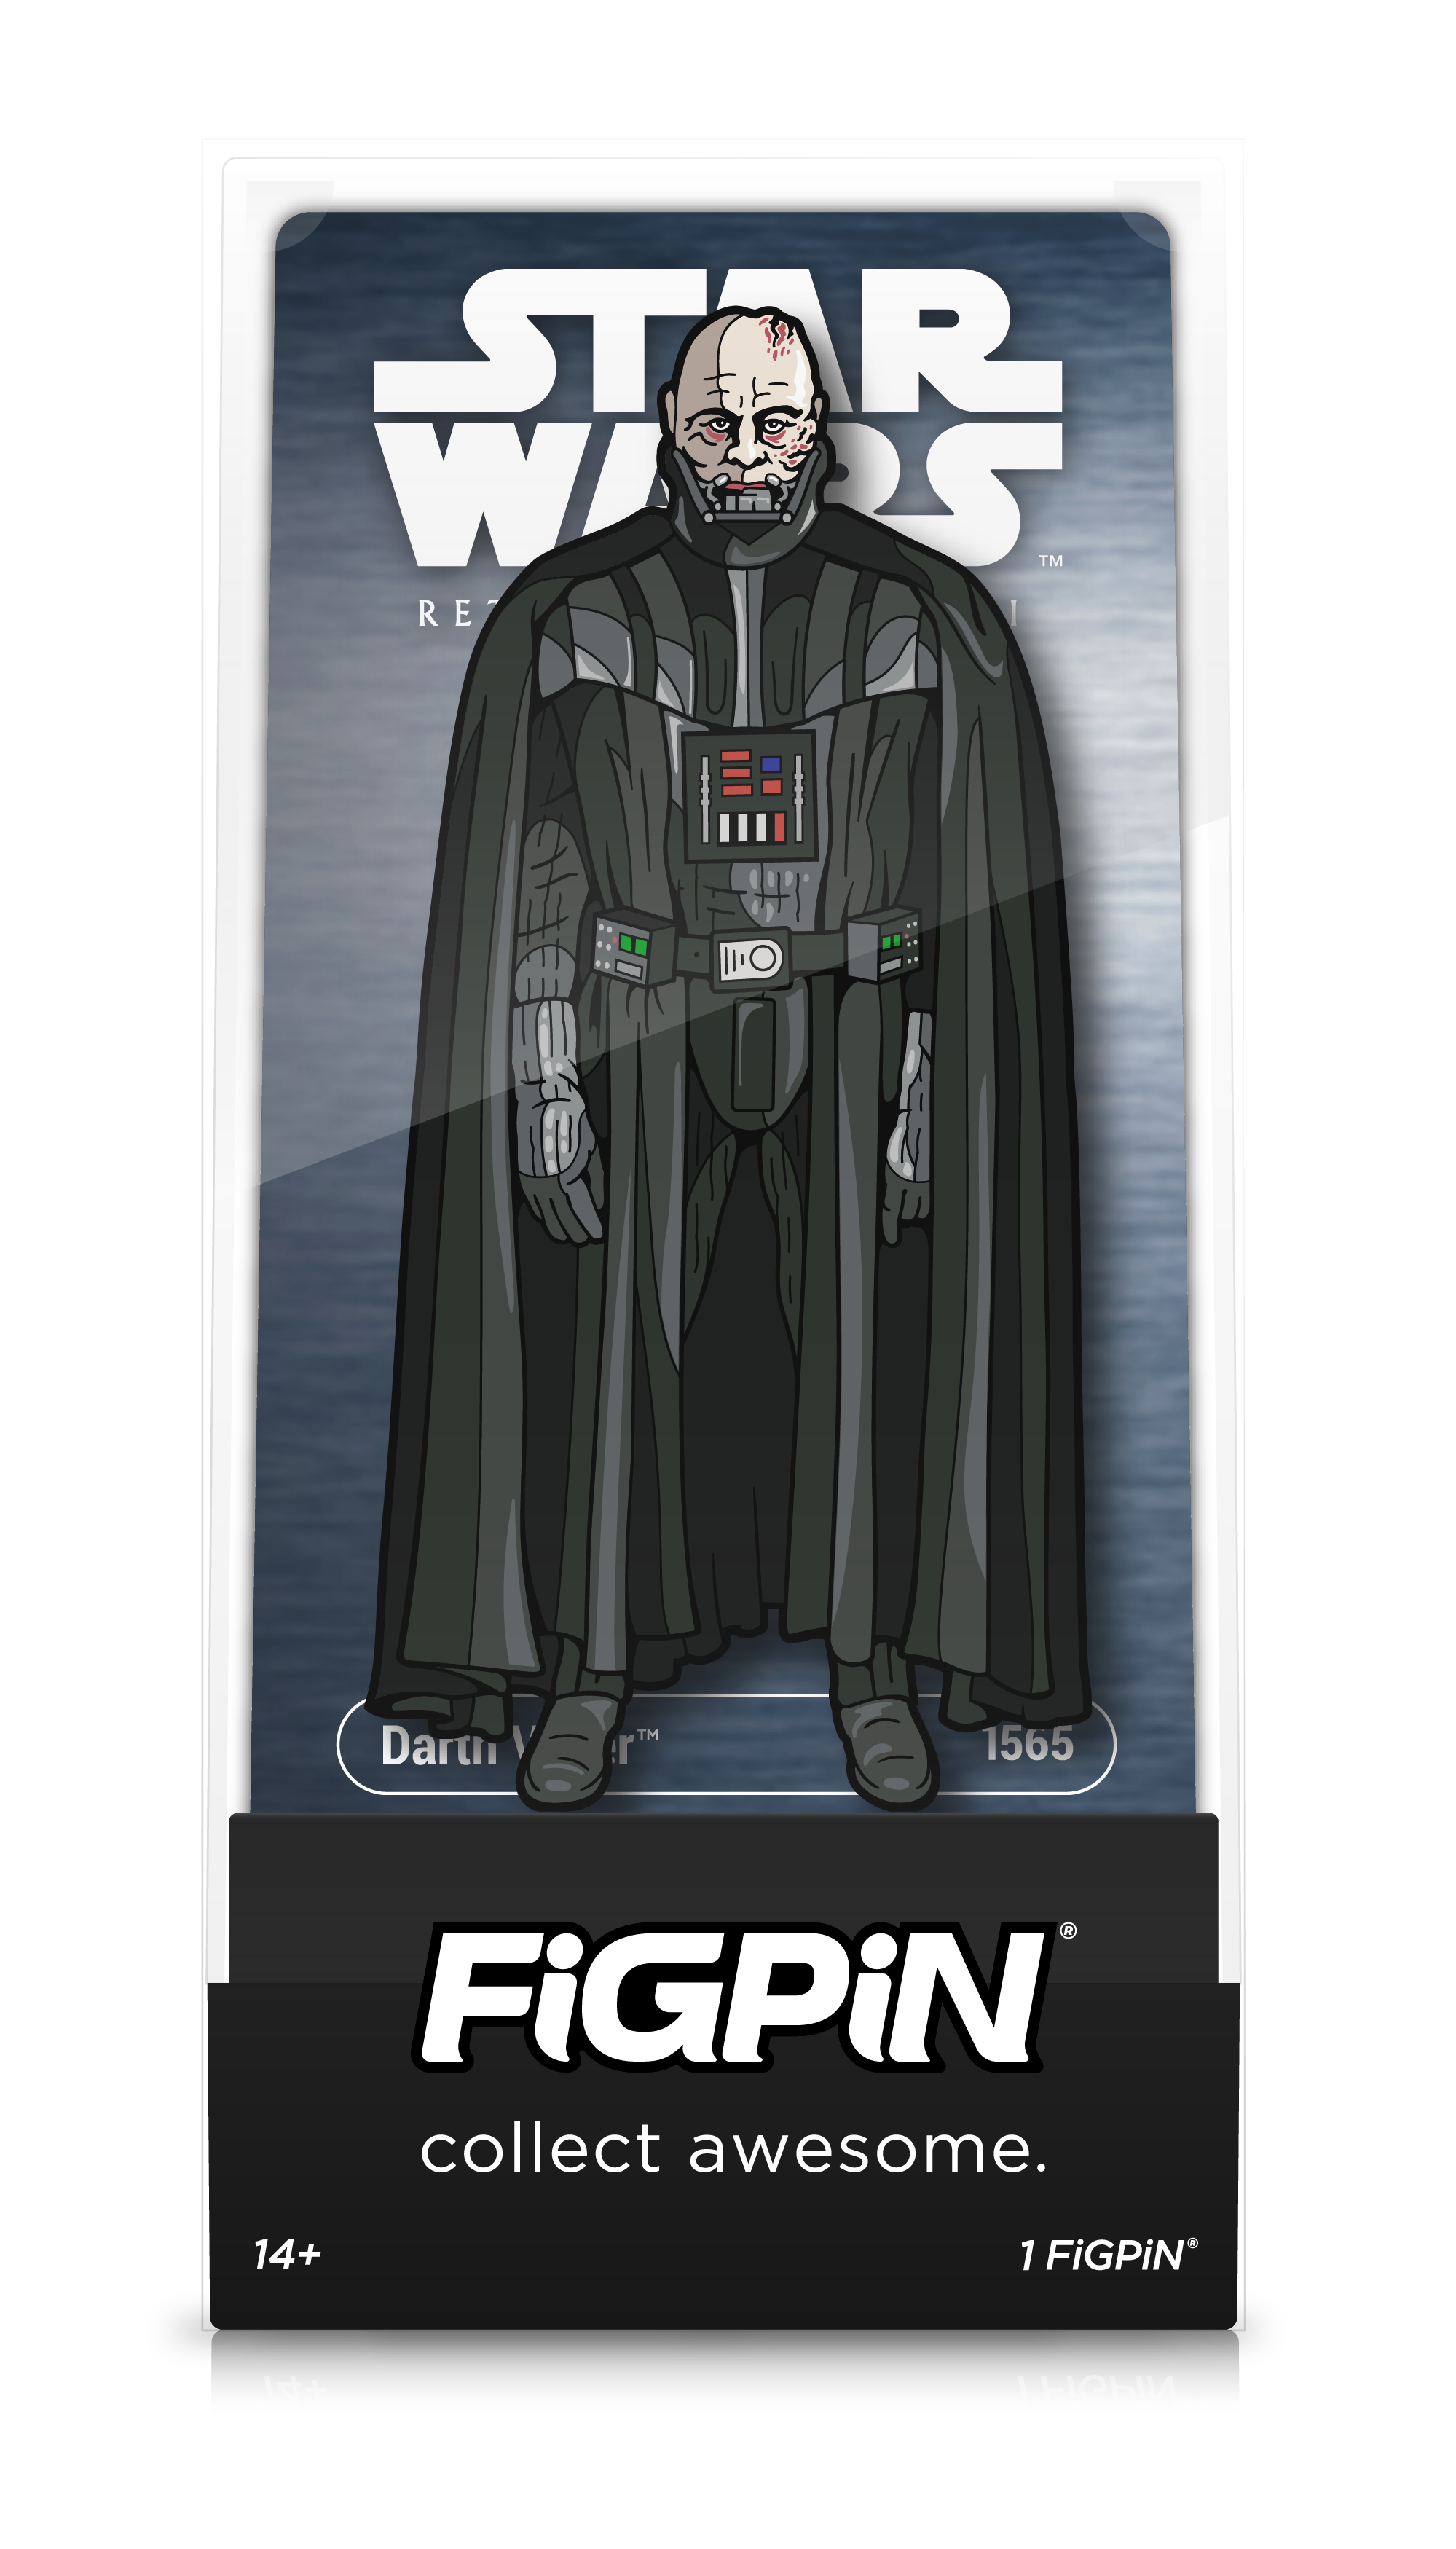 Front view of STAR WARS: RETURN OF THE JEDI's Darth Vader enamel pin inside FiGPiN Display case reading “collect awesome"